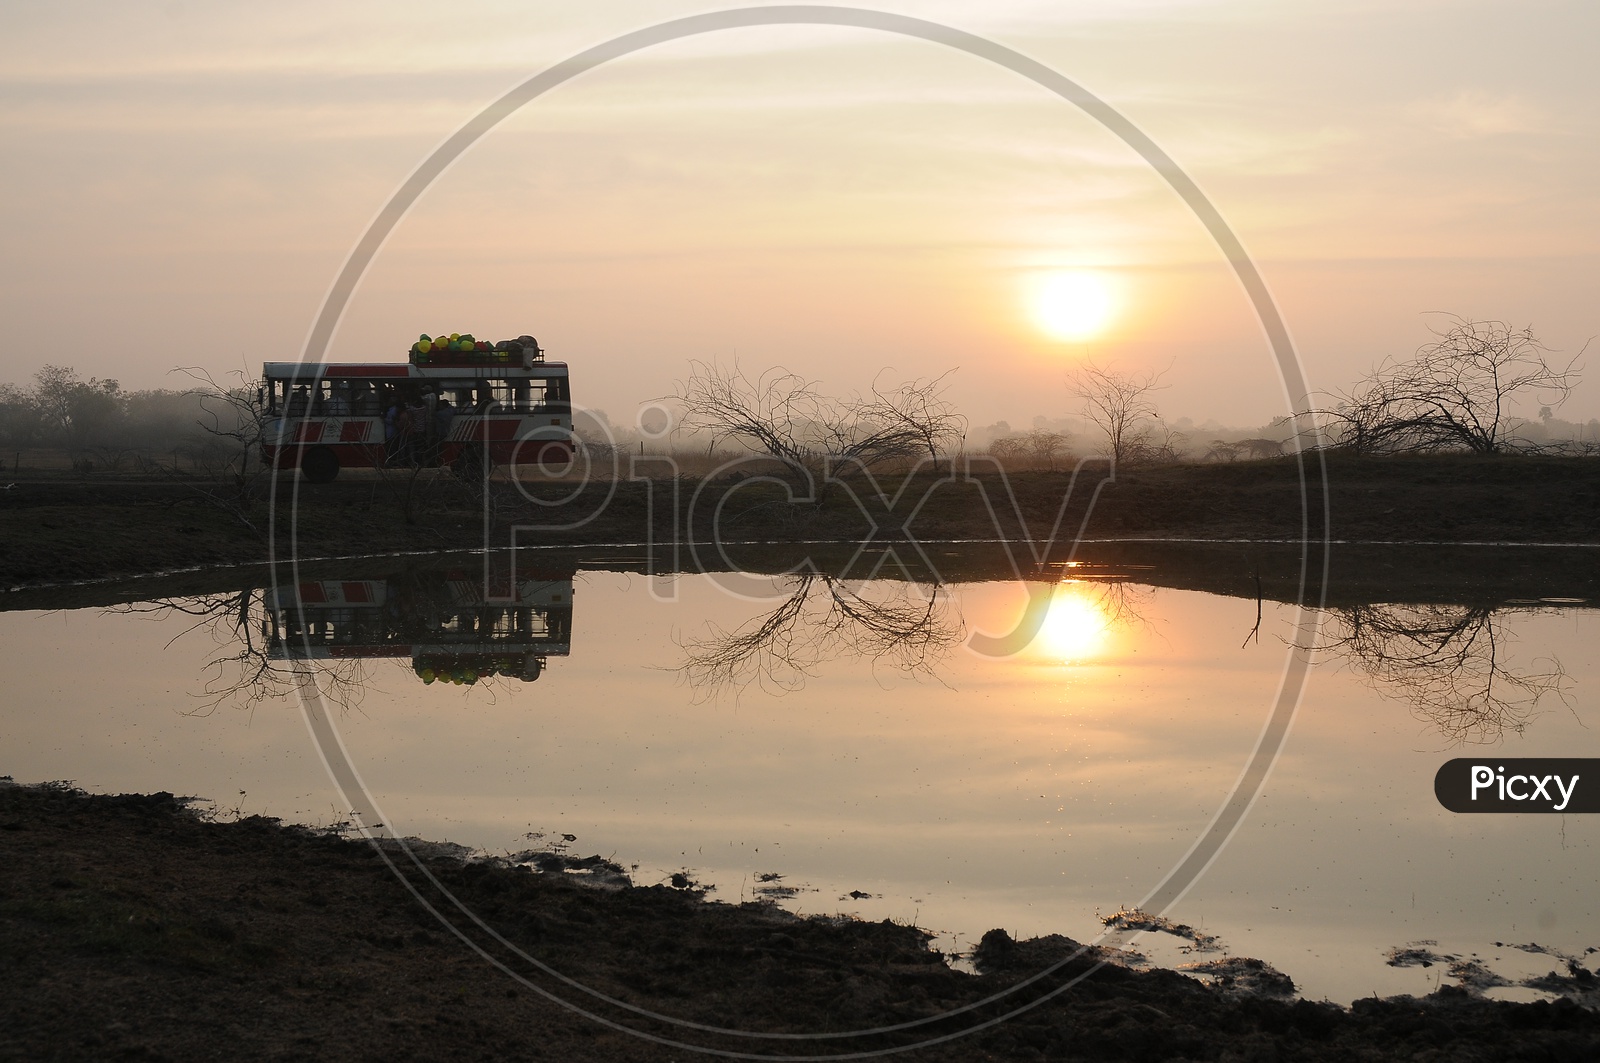 TSRTC  Rural Bus Service Running On Village Roads With Lake And sunset